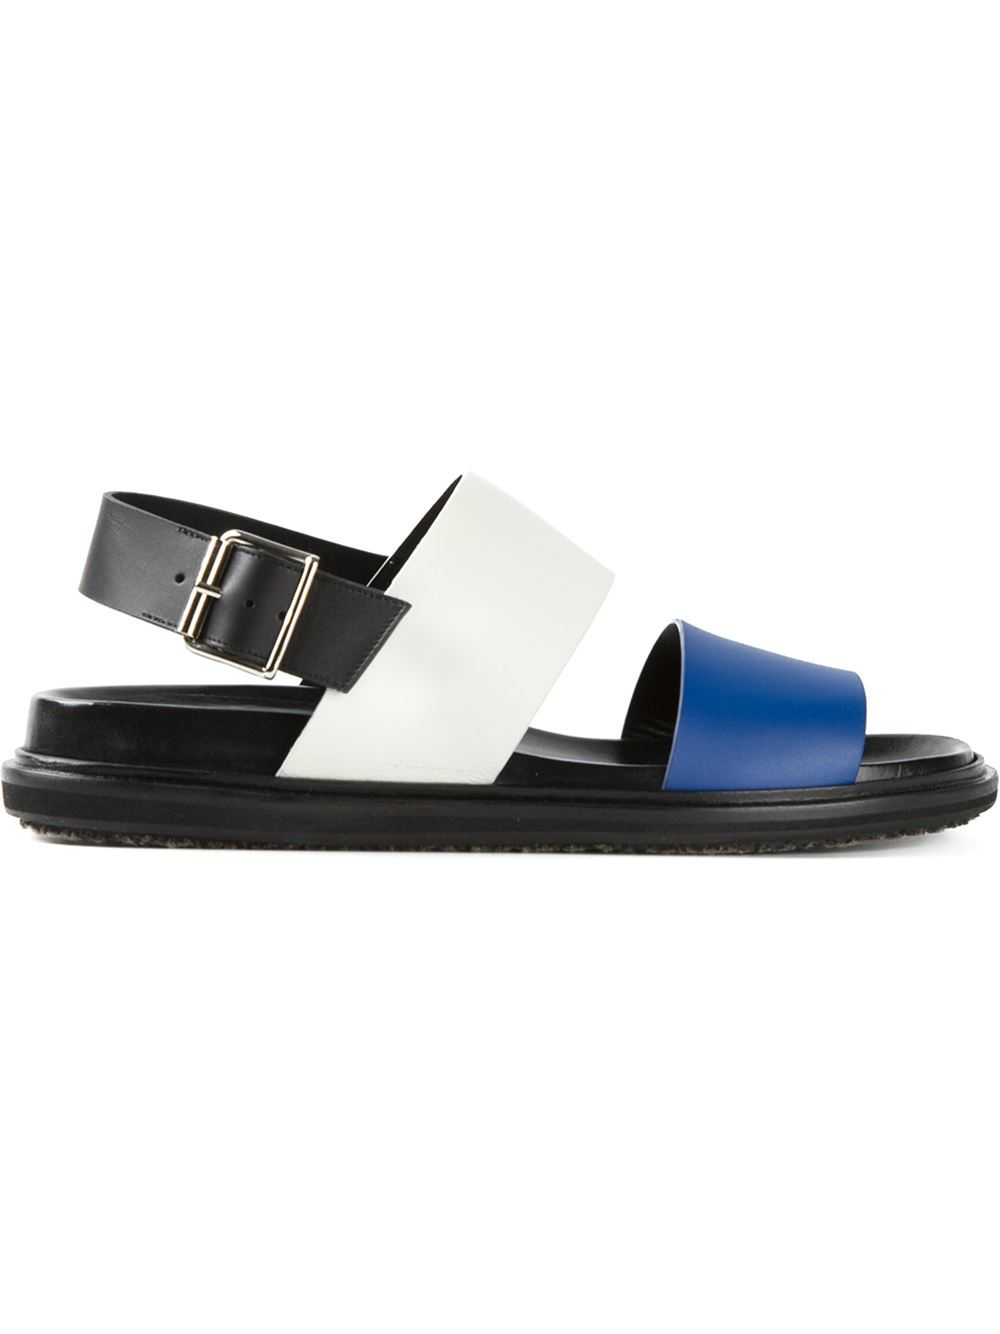 Marni Double Strap Sandals in Black for 